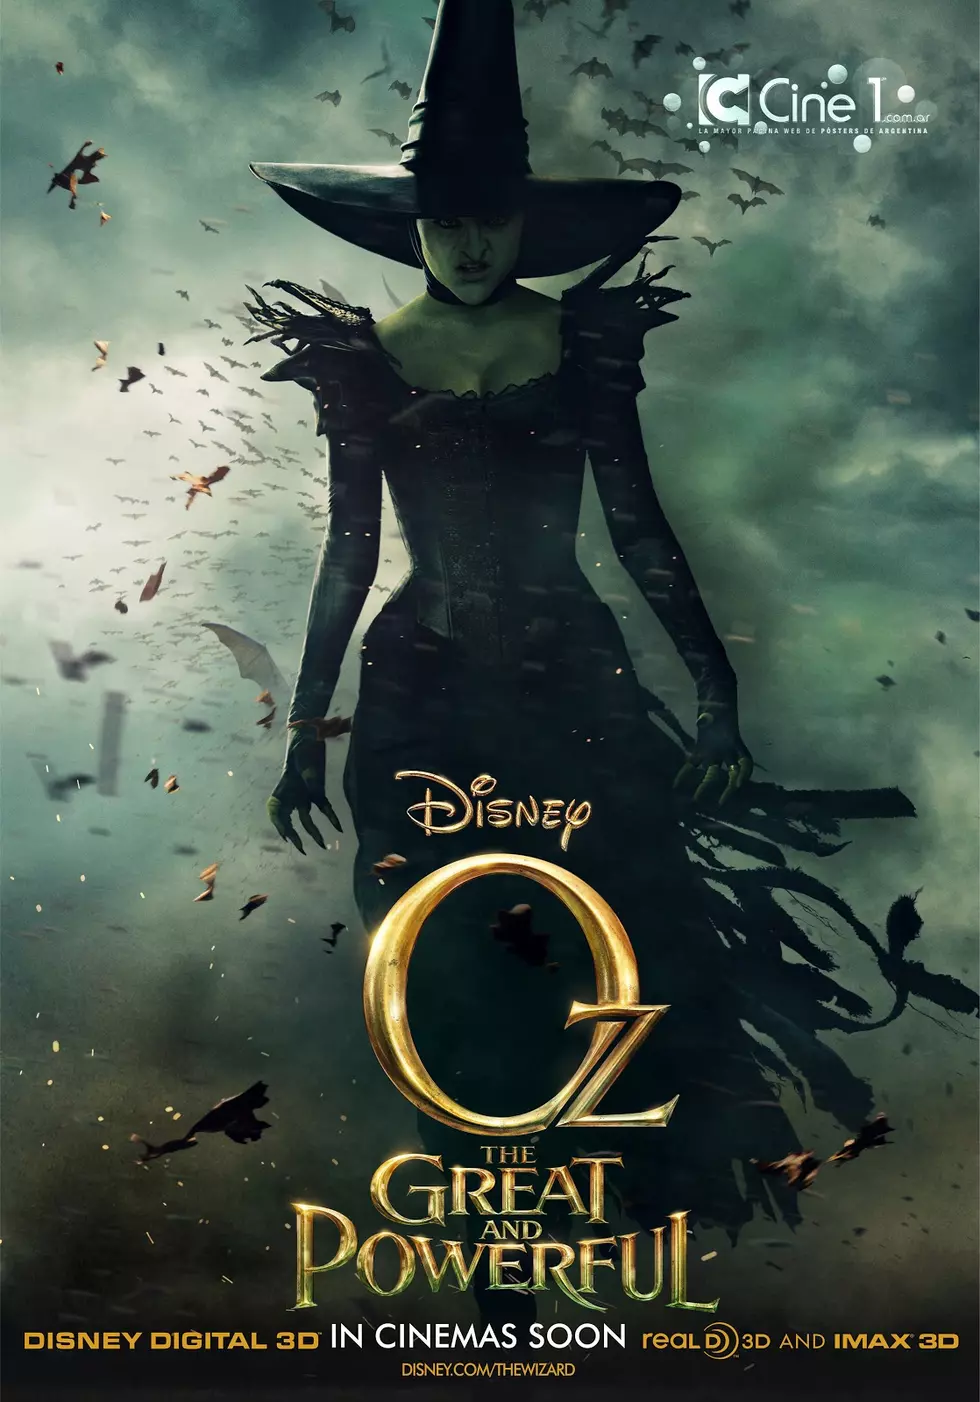 ‘Oz: The Great and Powerful’ Poster: The Wicked Witch Gets Up Close and Personal